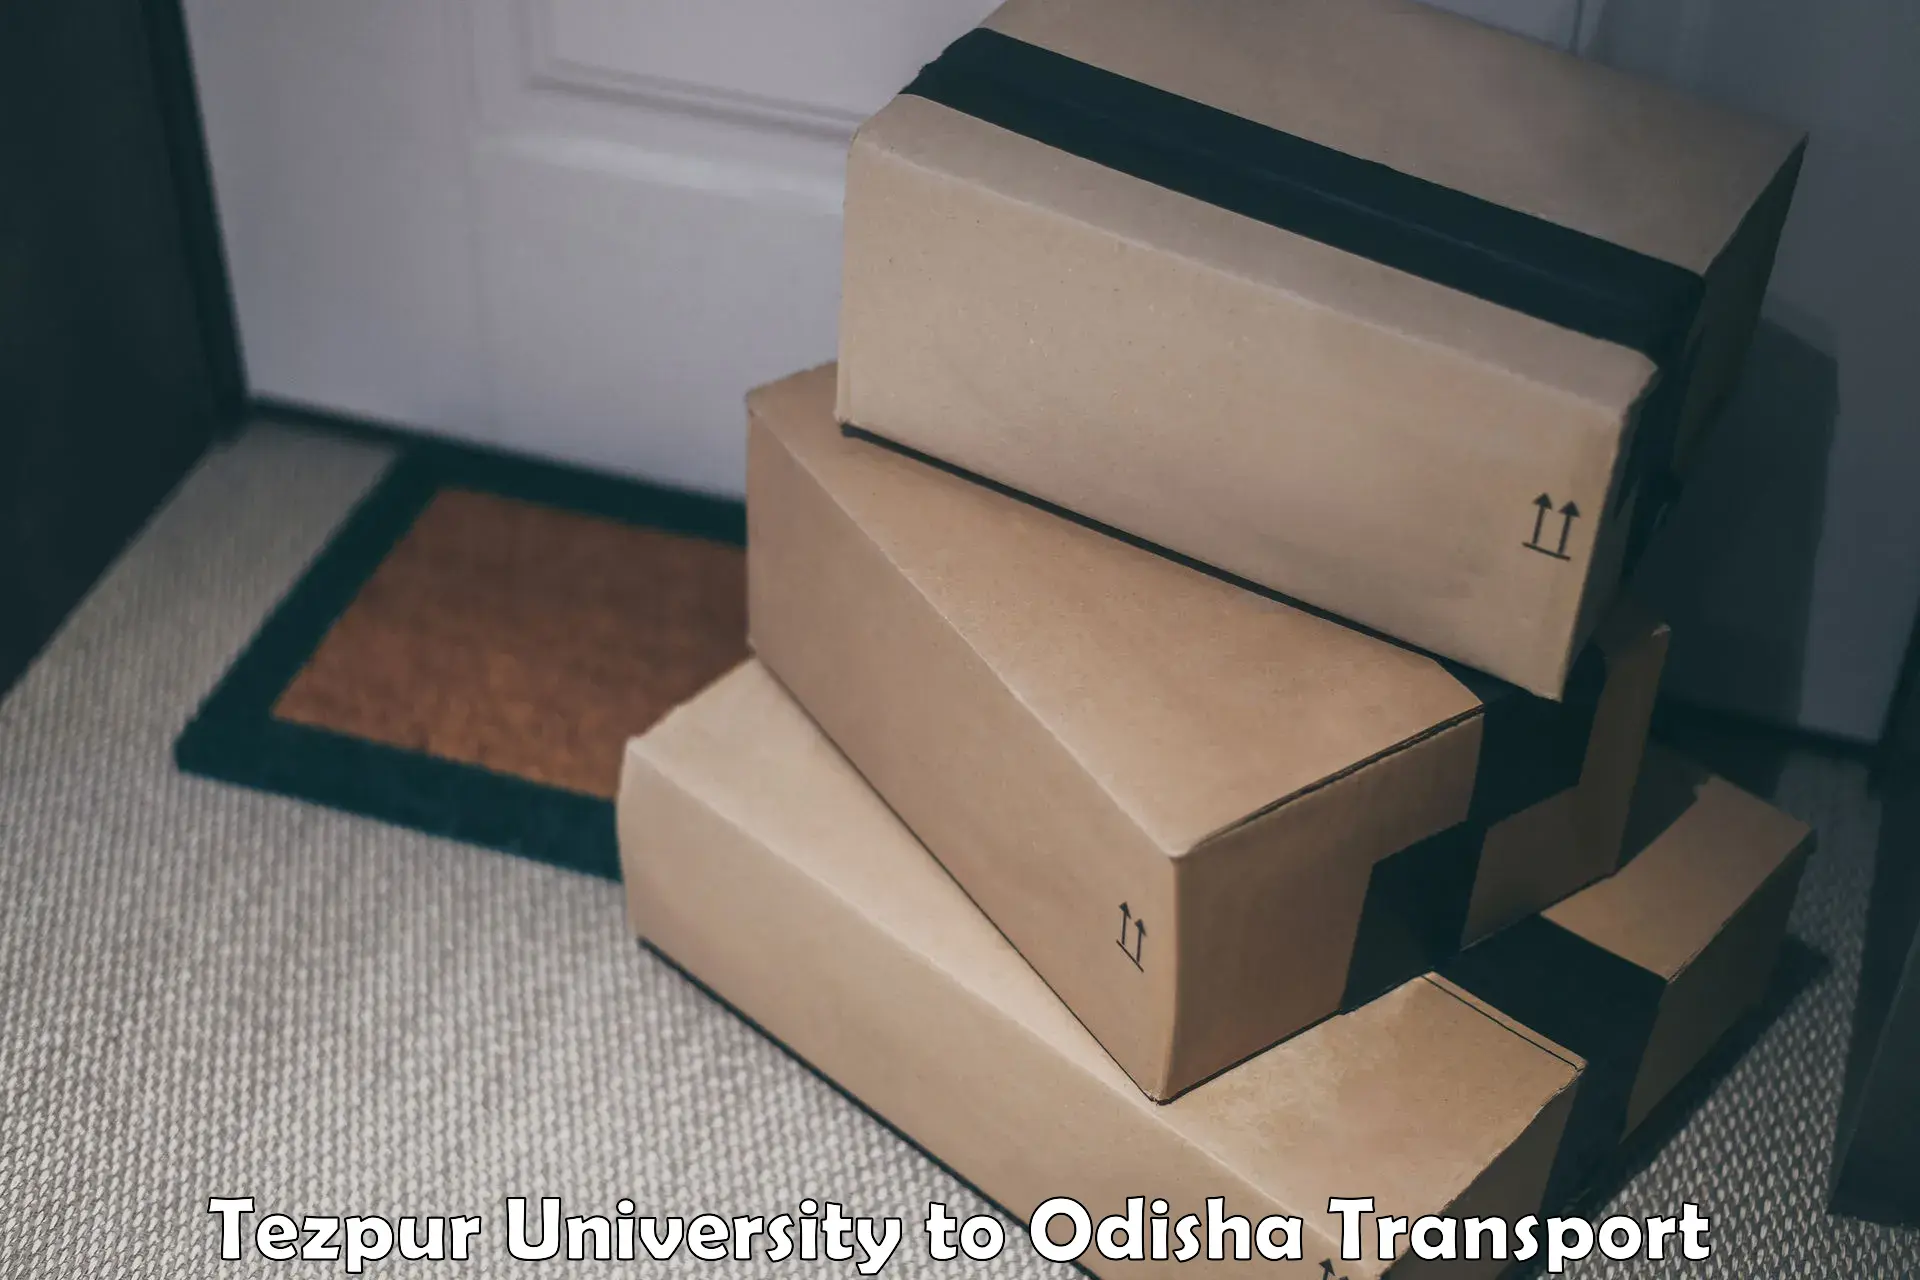 Lorry transport service in Tezpur University to Baliapal